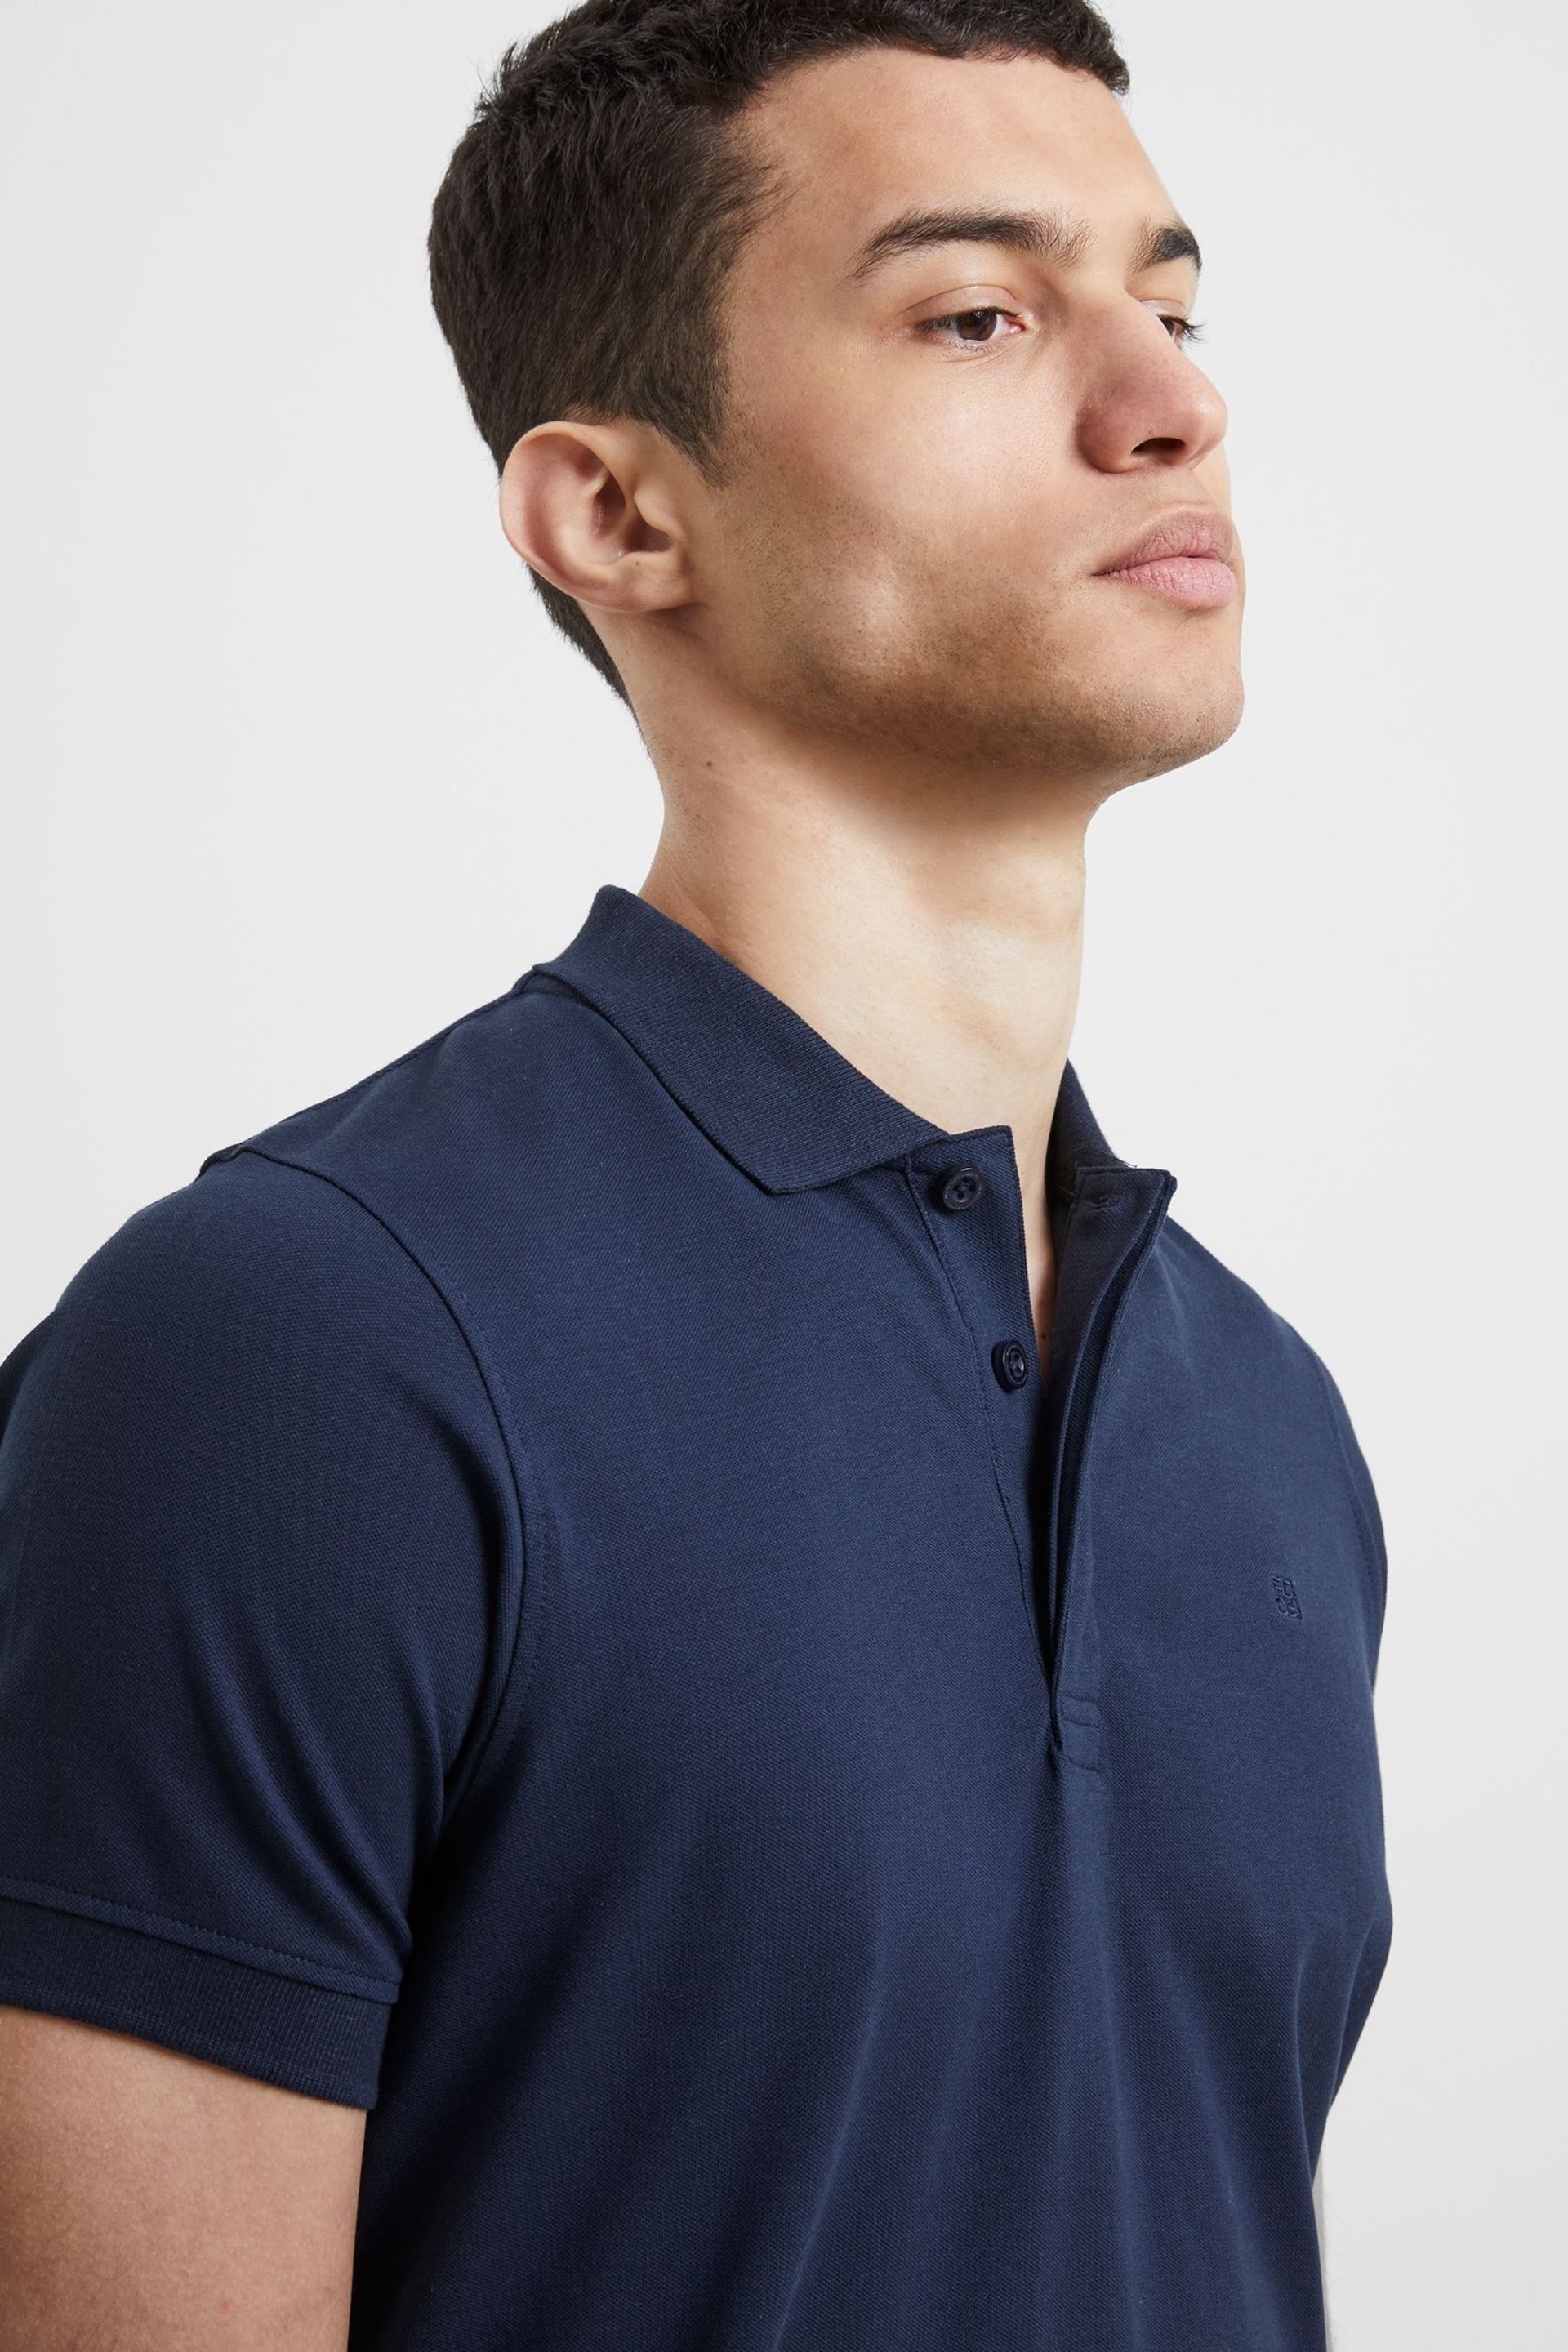 French Connection Nights Danforth Polo Shirt - Image 3 of 4